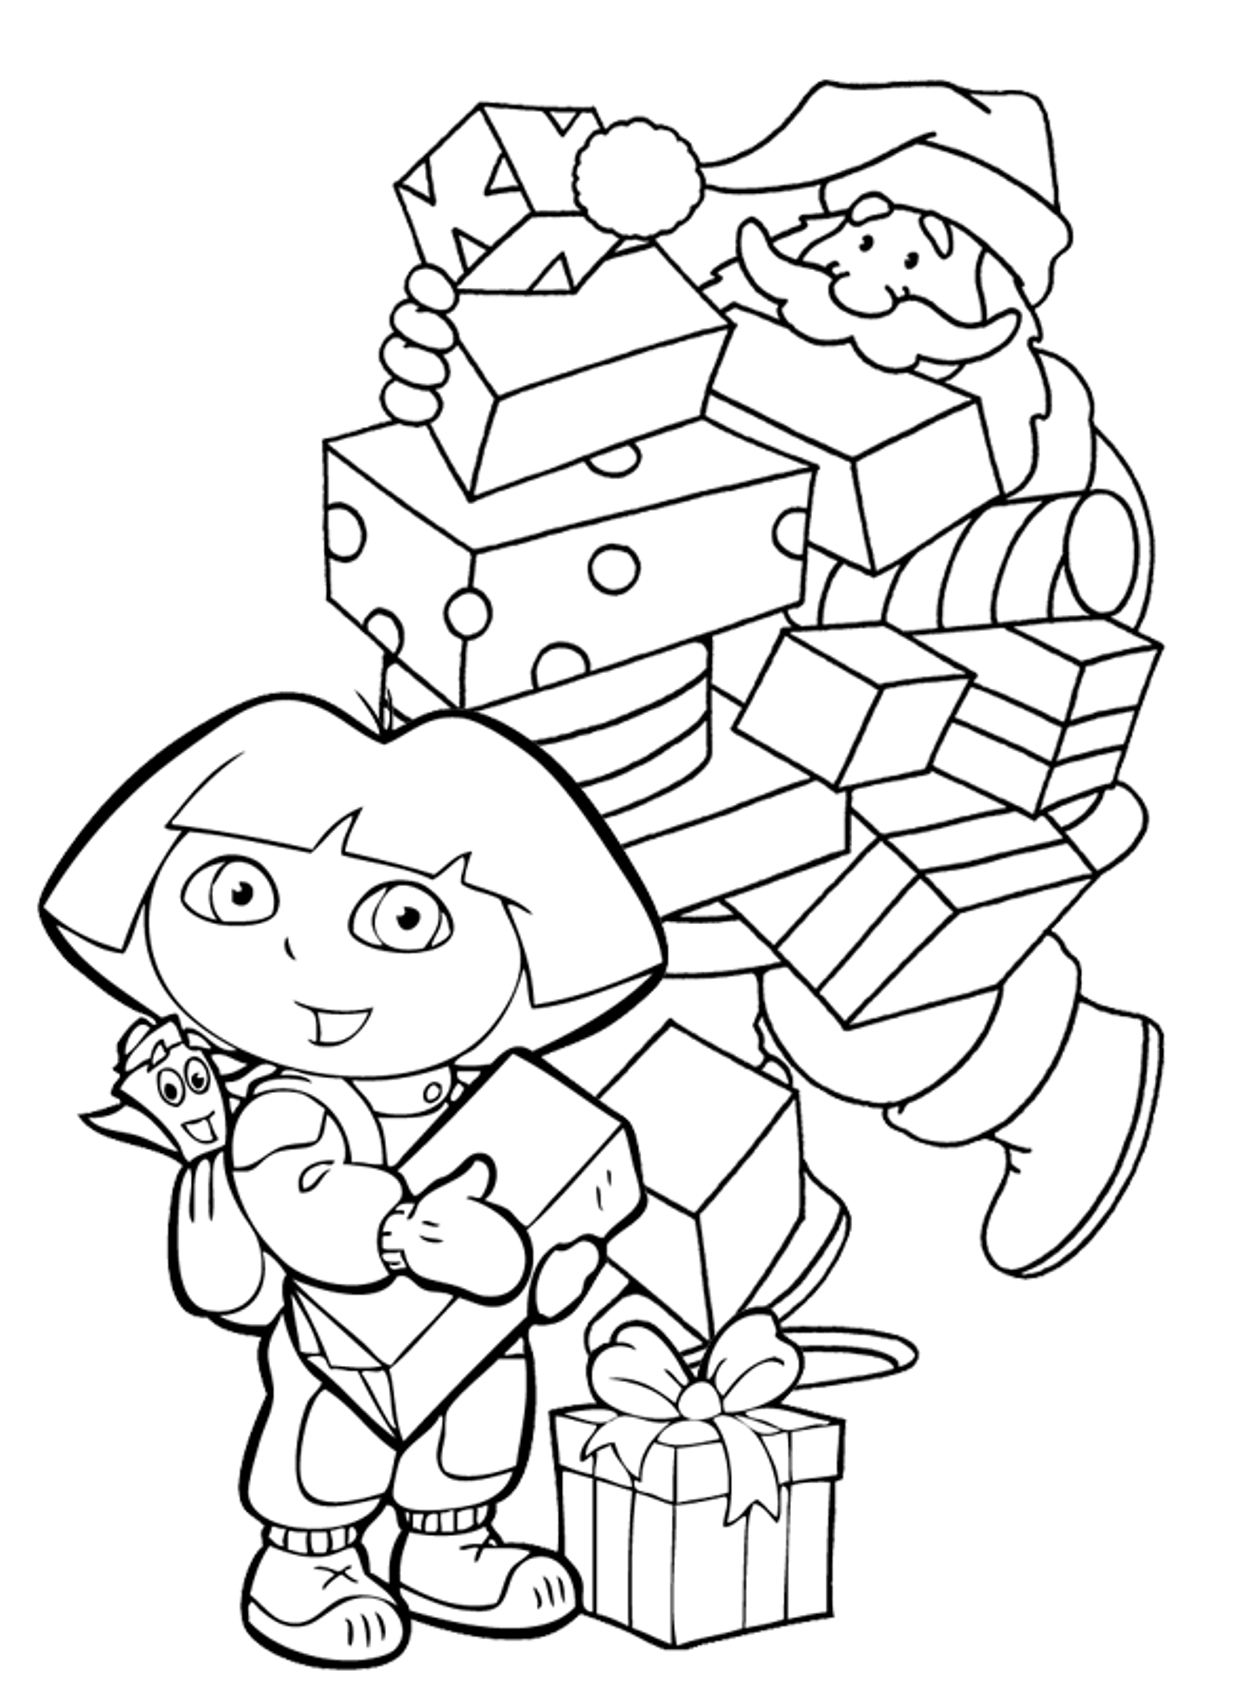 Free Dora Christmas Coloring Pages, Download Free Dora Christmas ...